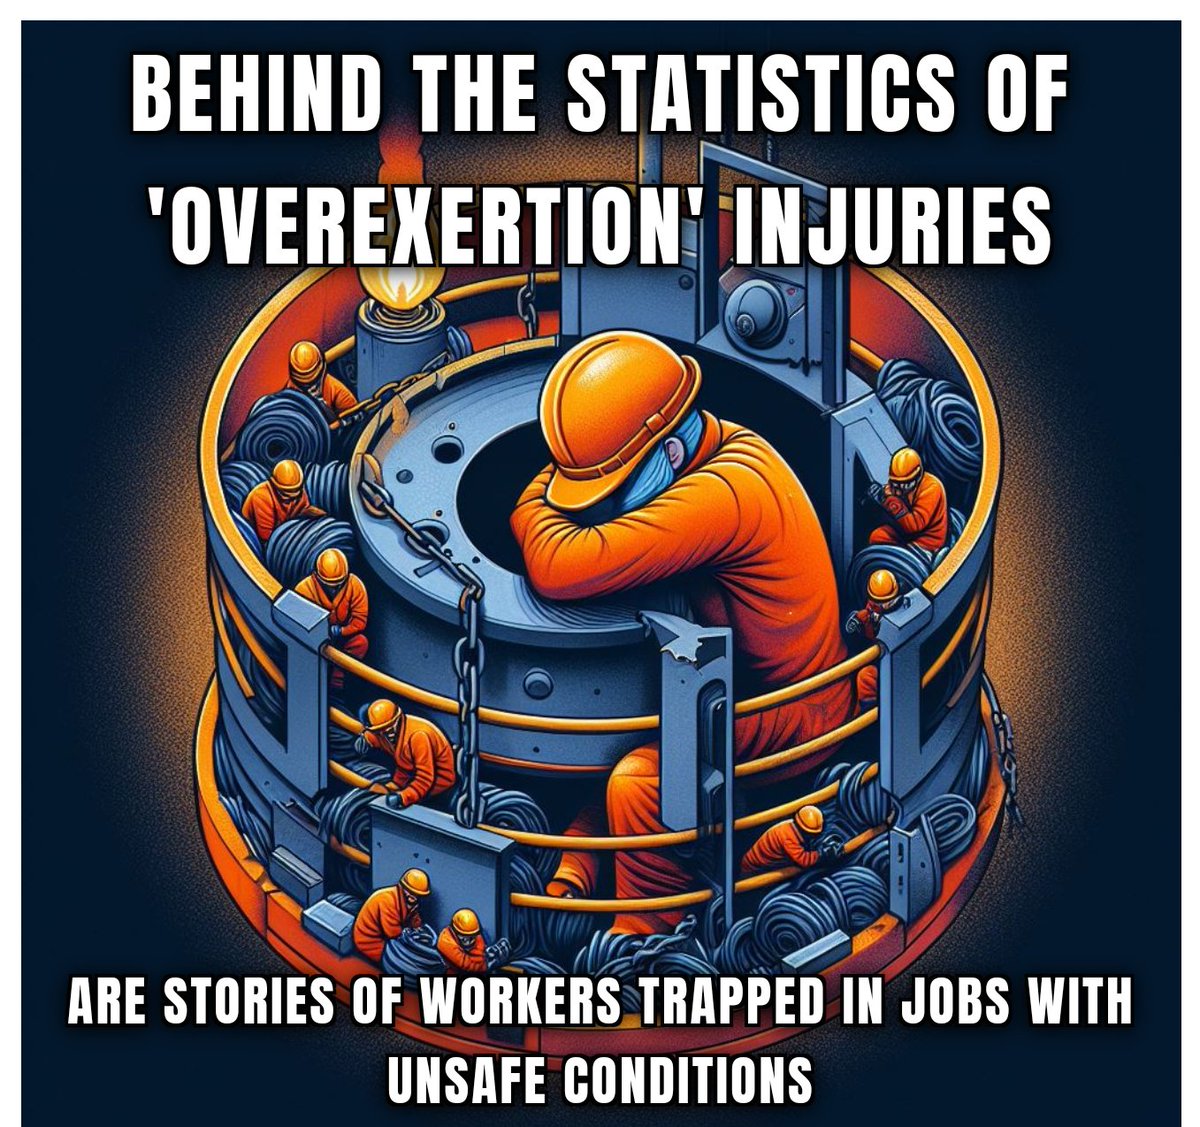 Beyond the numbers lies a harsh reality: 'overexertion' injuries often hide stories of workers stuck in unsafe jobs. Let's shine a light on these stories to advocate for safer workplaces. #InjuredWorkersUnite #WorkplaceSafety